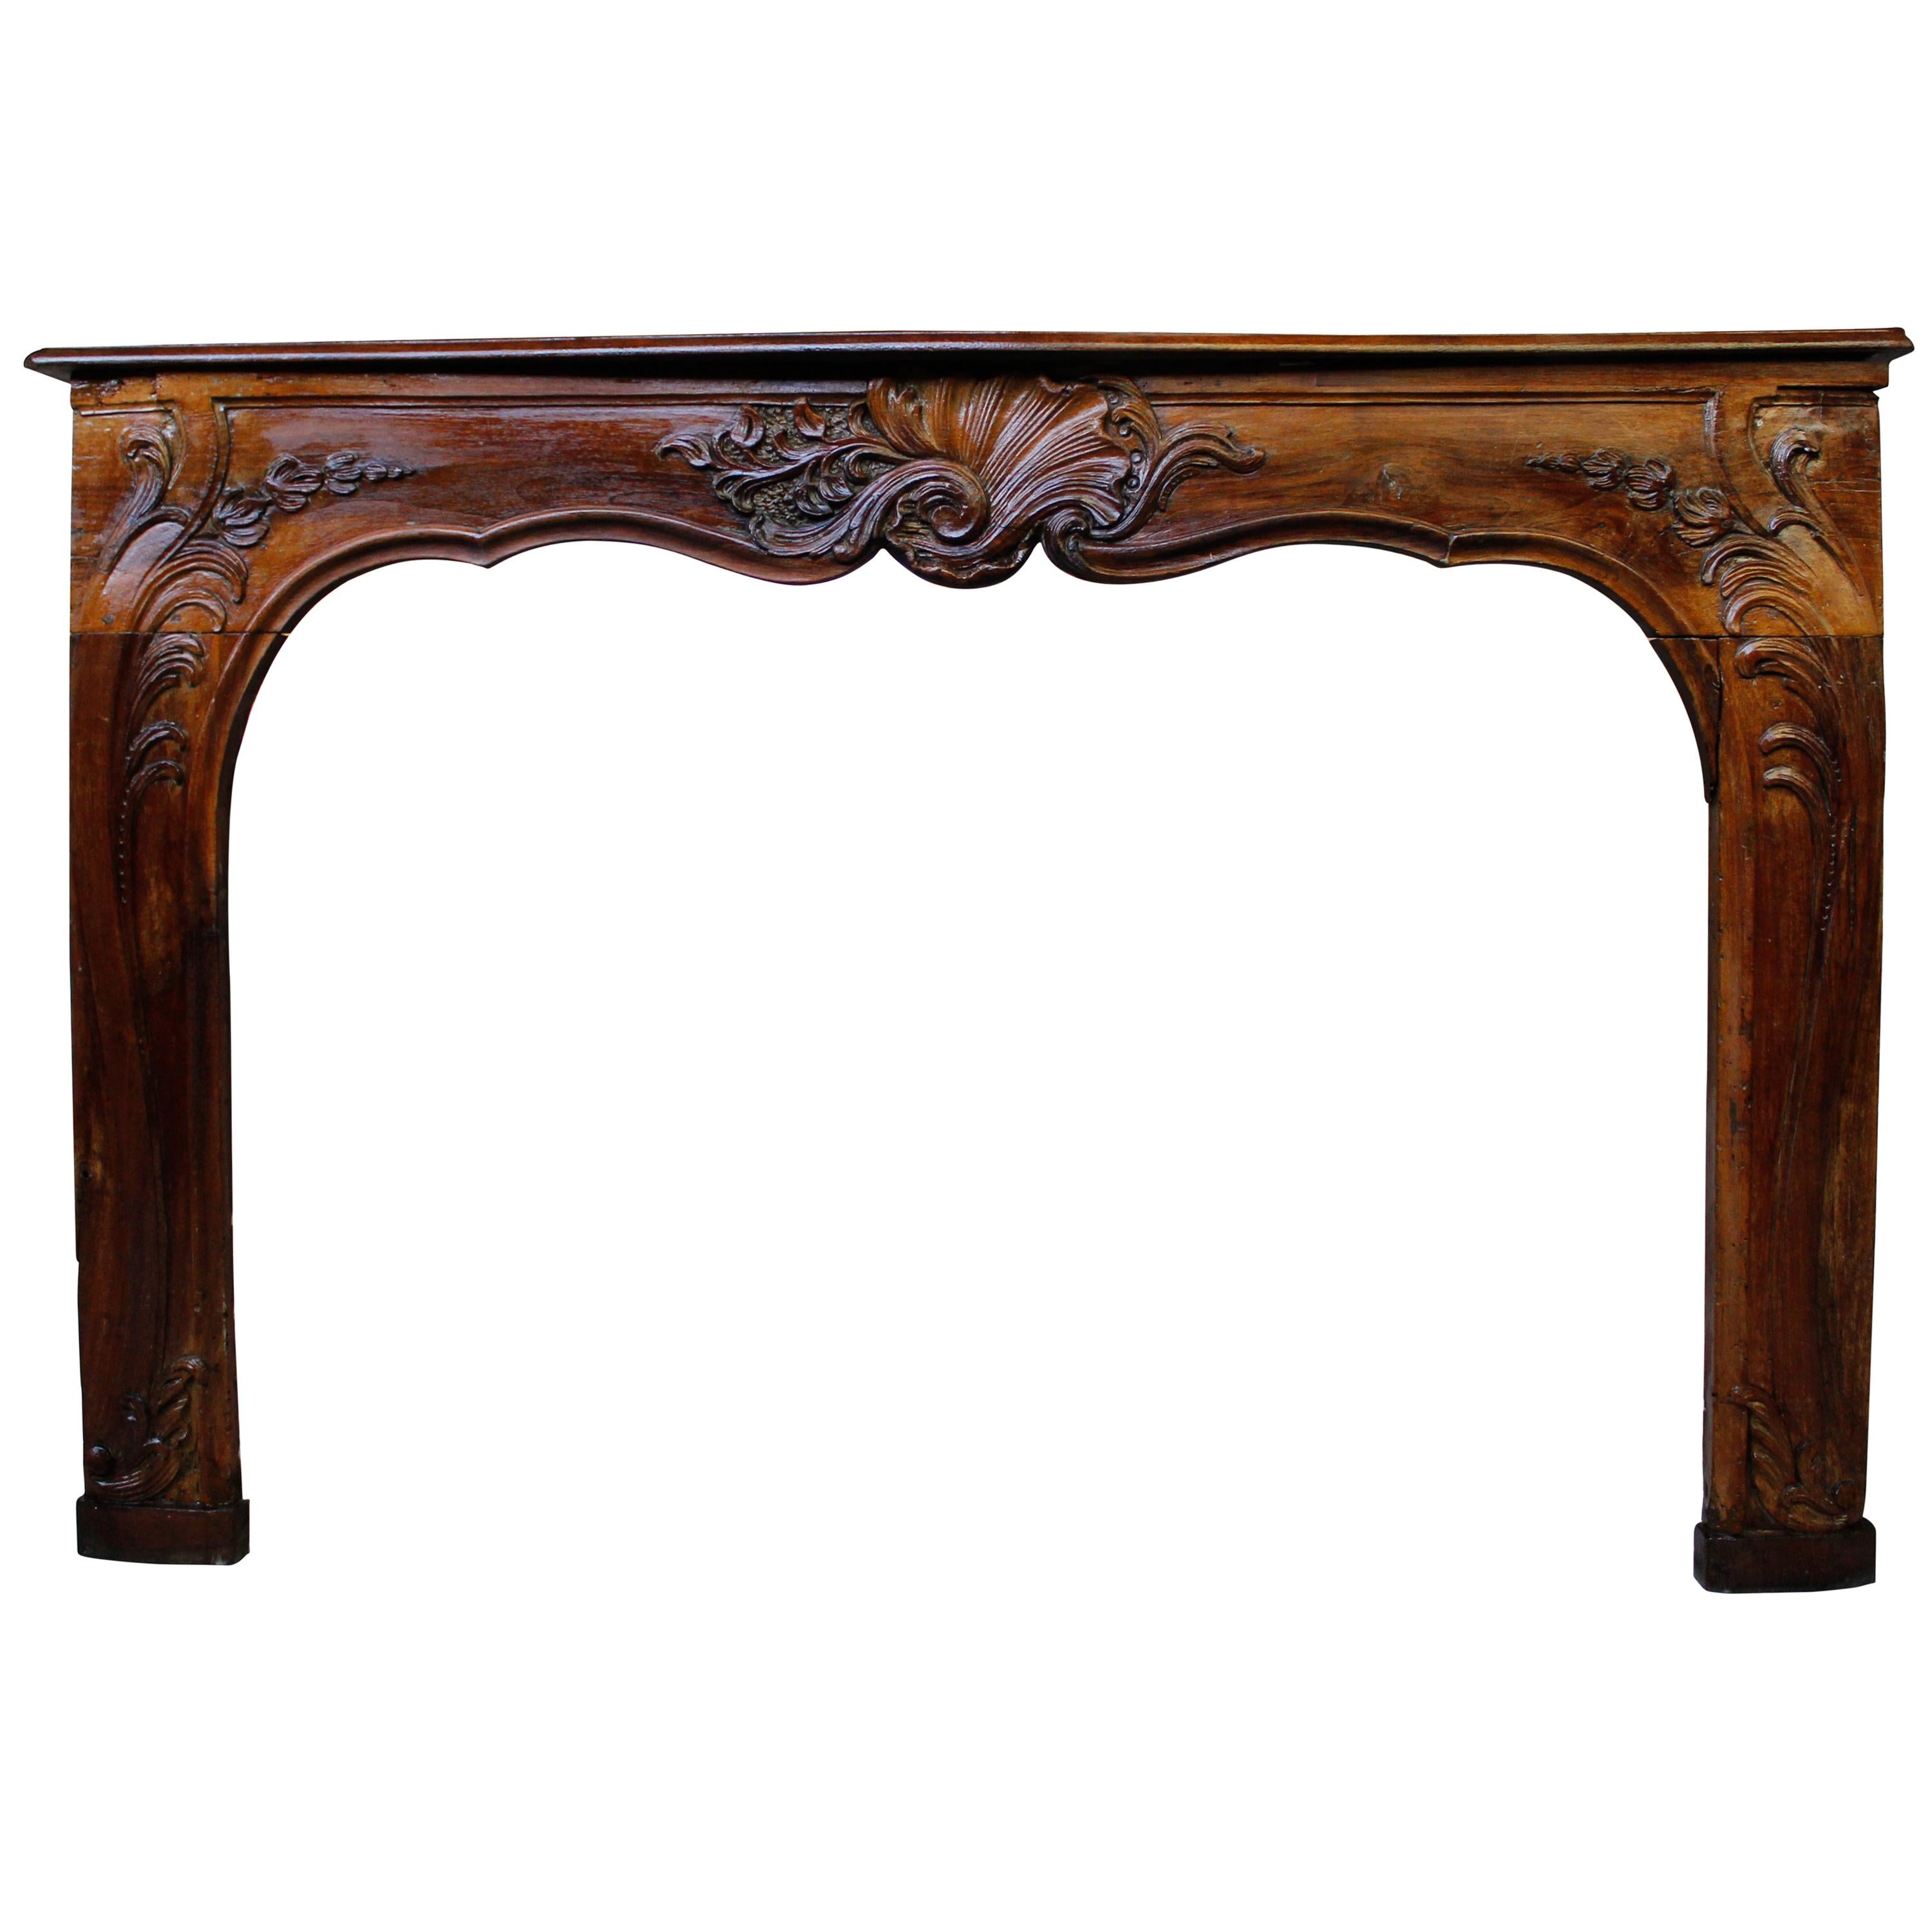 Antique Louis XV Period Pear Tree Wooden Fireplace Mantel For Sale